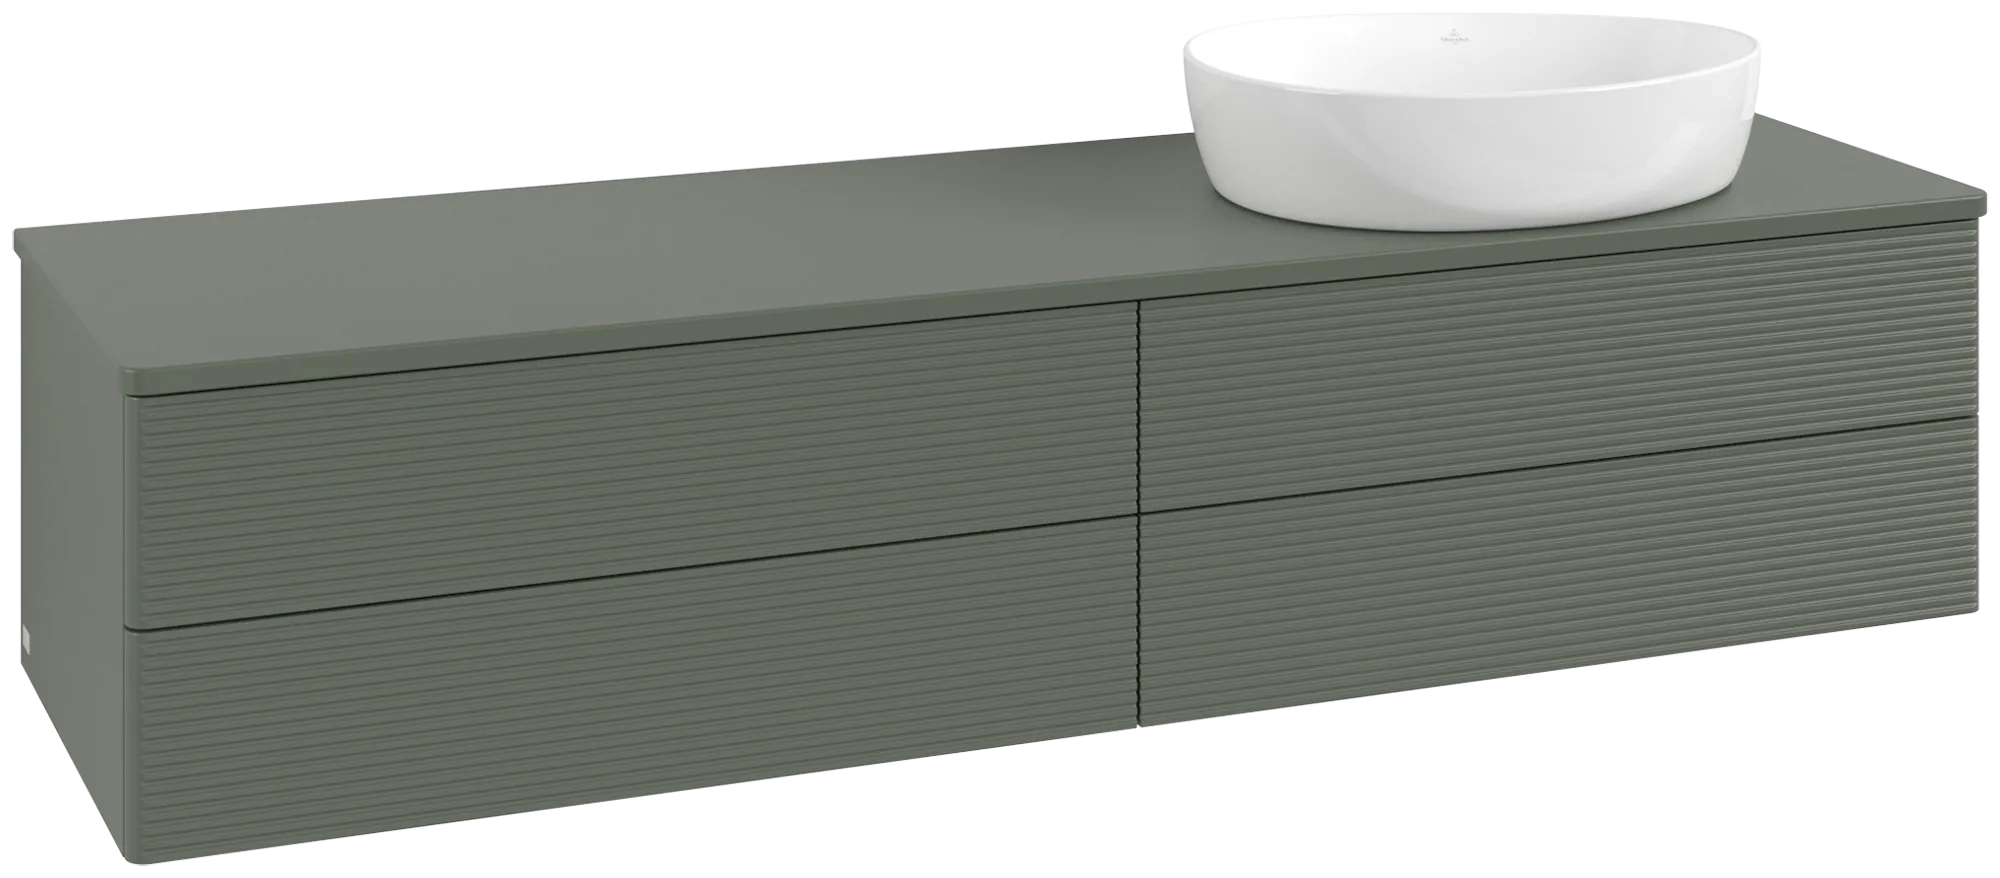 Picture of VILLEROY BOCH Antao Vanity unit, 4 pull-out compartments, 1600 x 360 x 500 mm, Front with grain texture, Leaf Green Matt Lacquer / Leaf Green Matt Lacquer #K27110HL